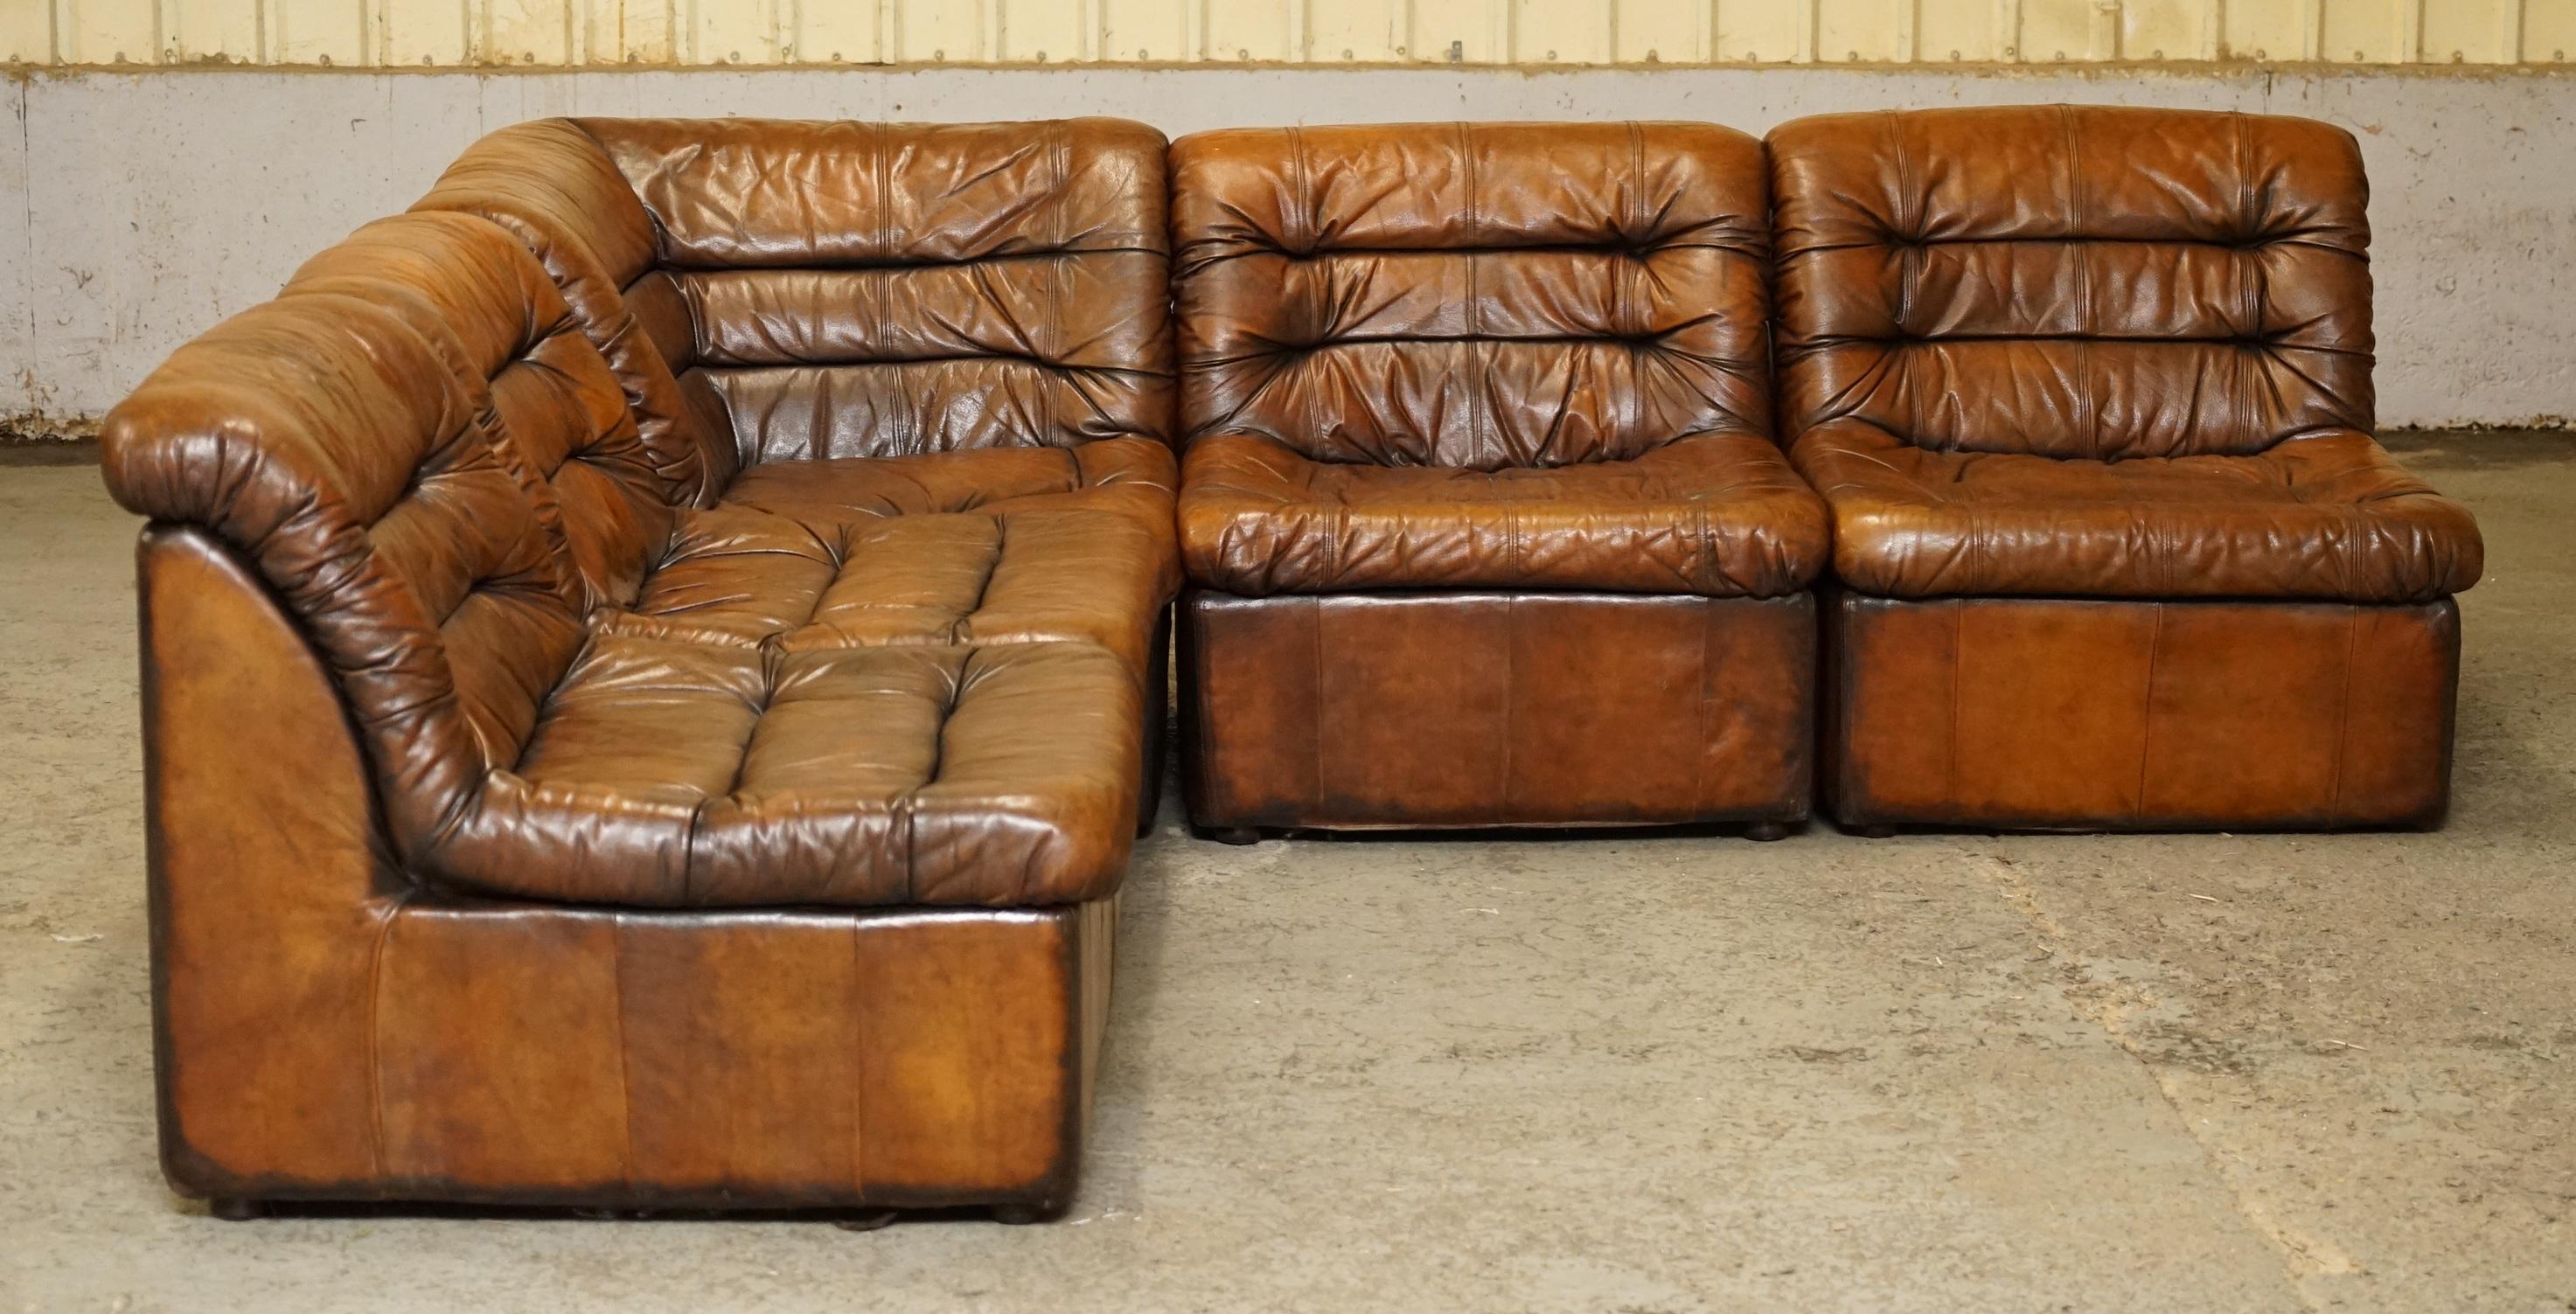 Wimbledon-Furniture

Wimbledon-Furniture is delighted to offer for sale this very rare and highly collectable mid-century modern De Sede DS modular corner sofa armchair suite

Please note the delivery fee listed is just a guide, it covers within